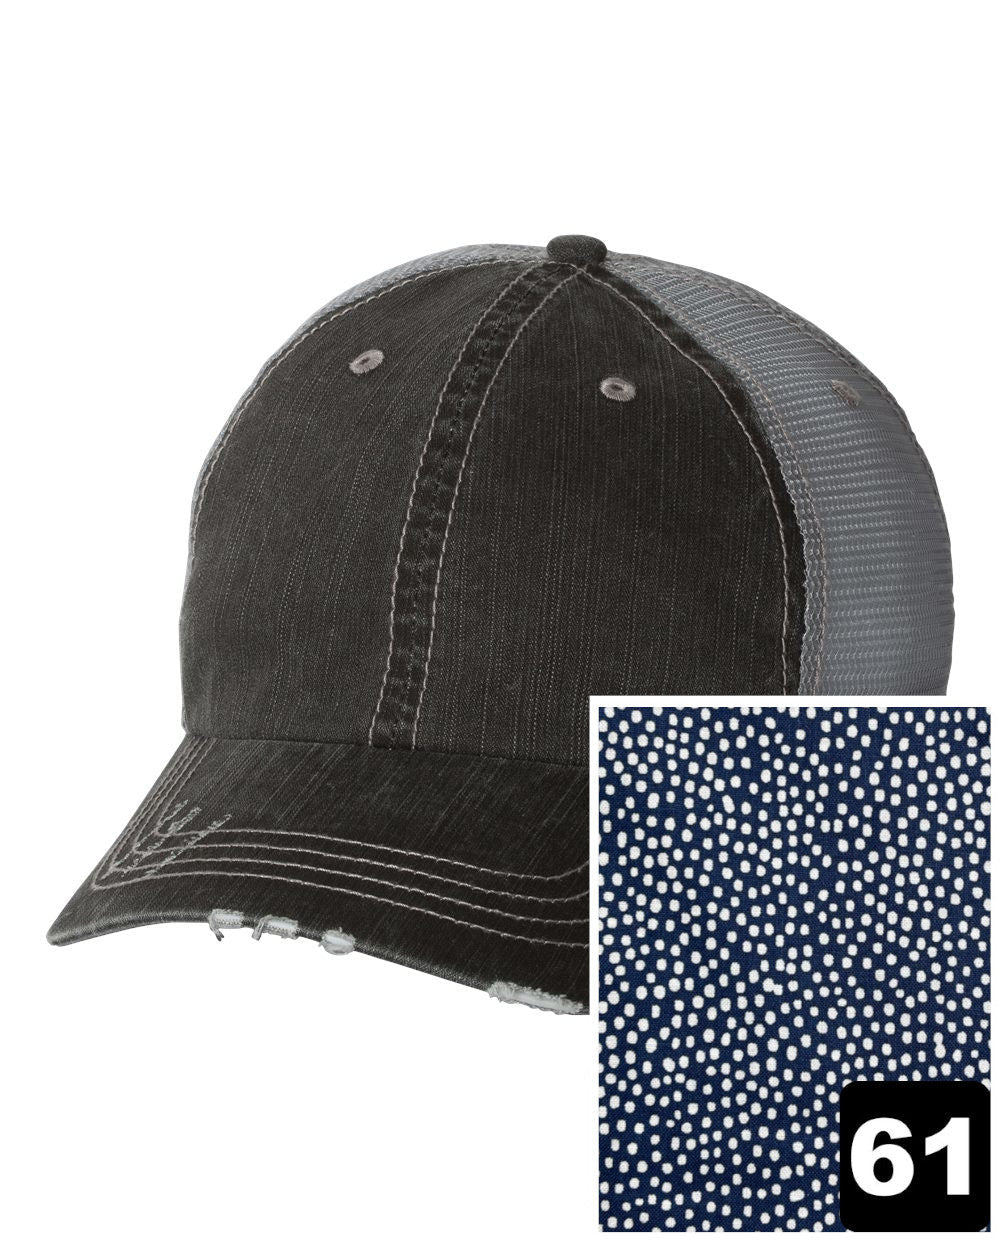 Mississippi Hat | Gray Distressed Trucker Cap | Many Fabric Choices